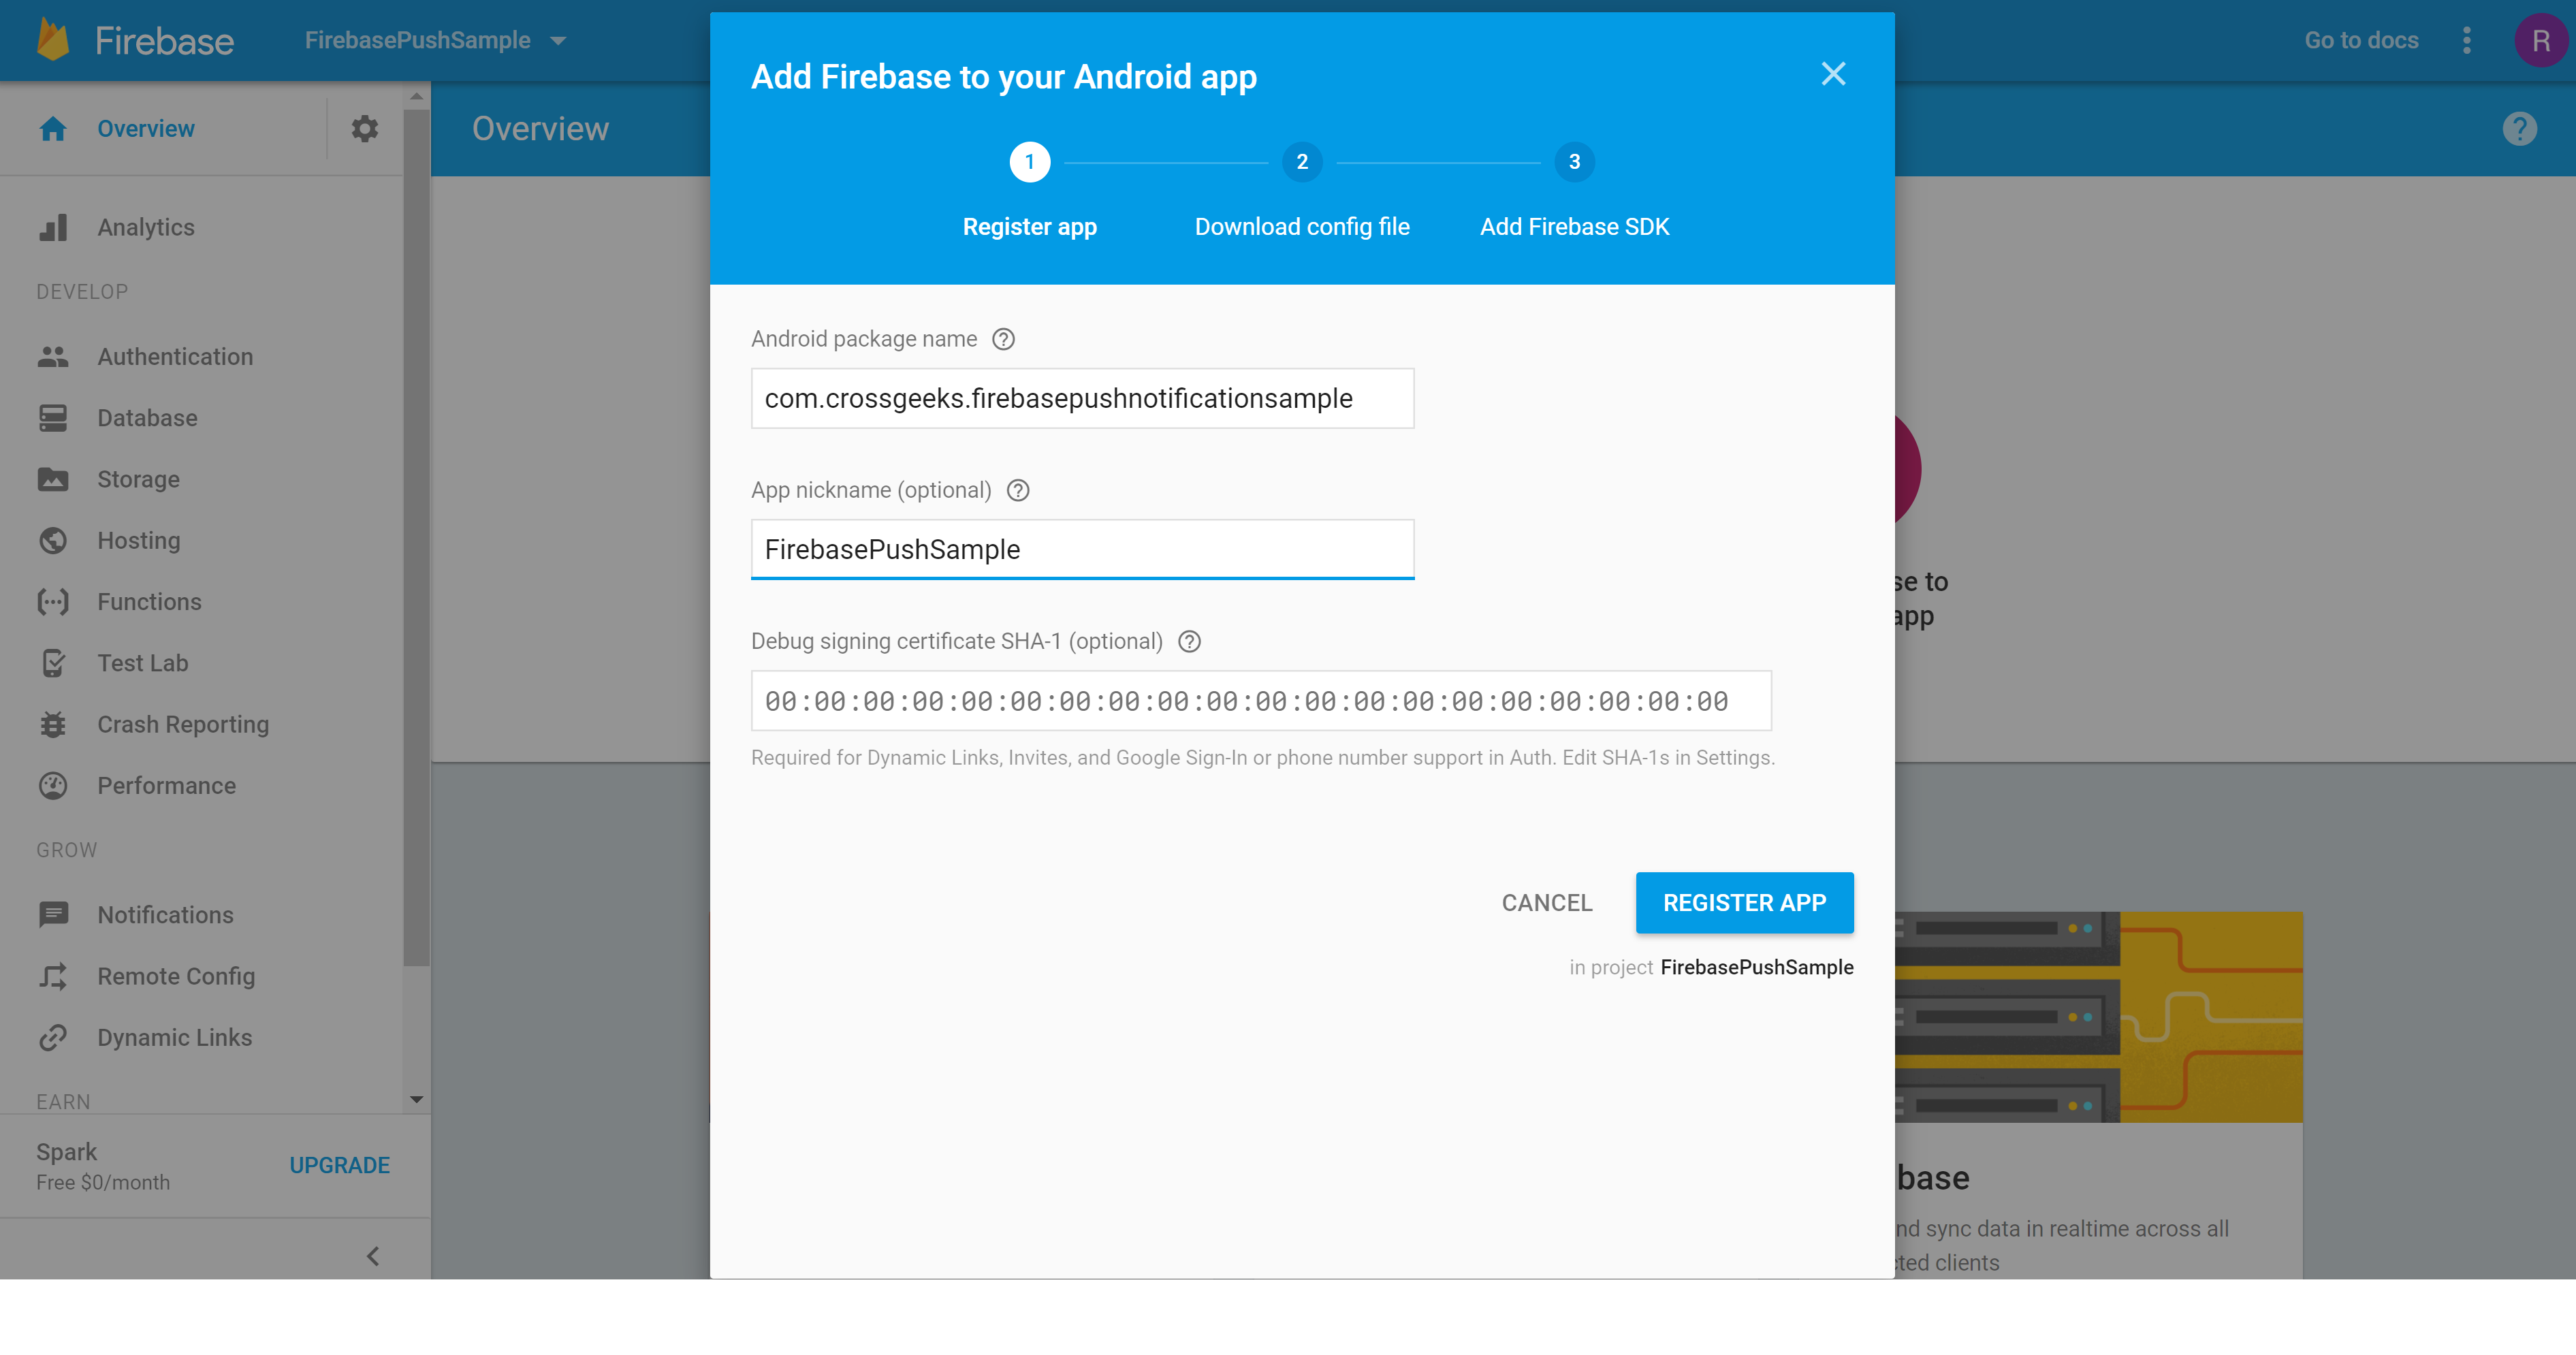 Add Firebase to Android